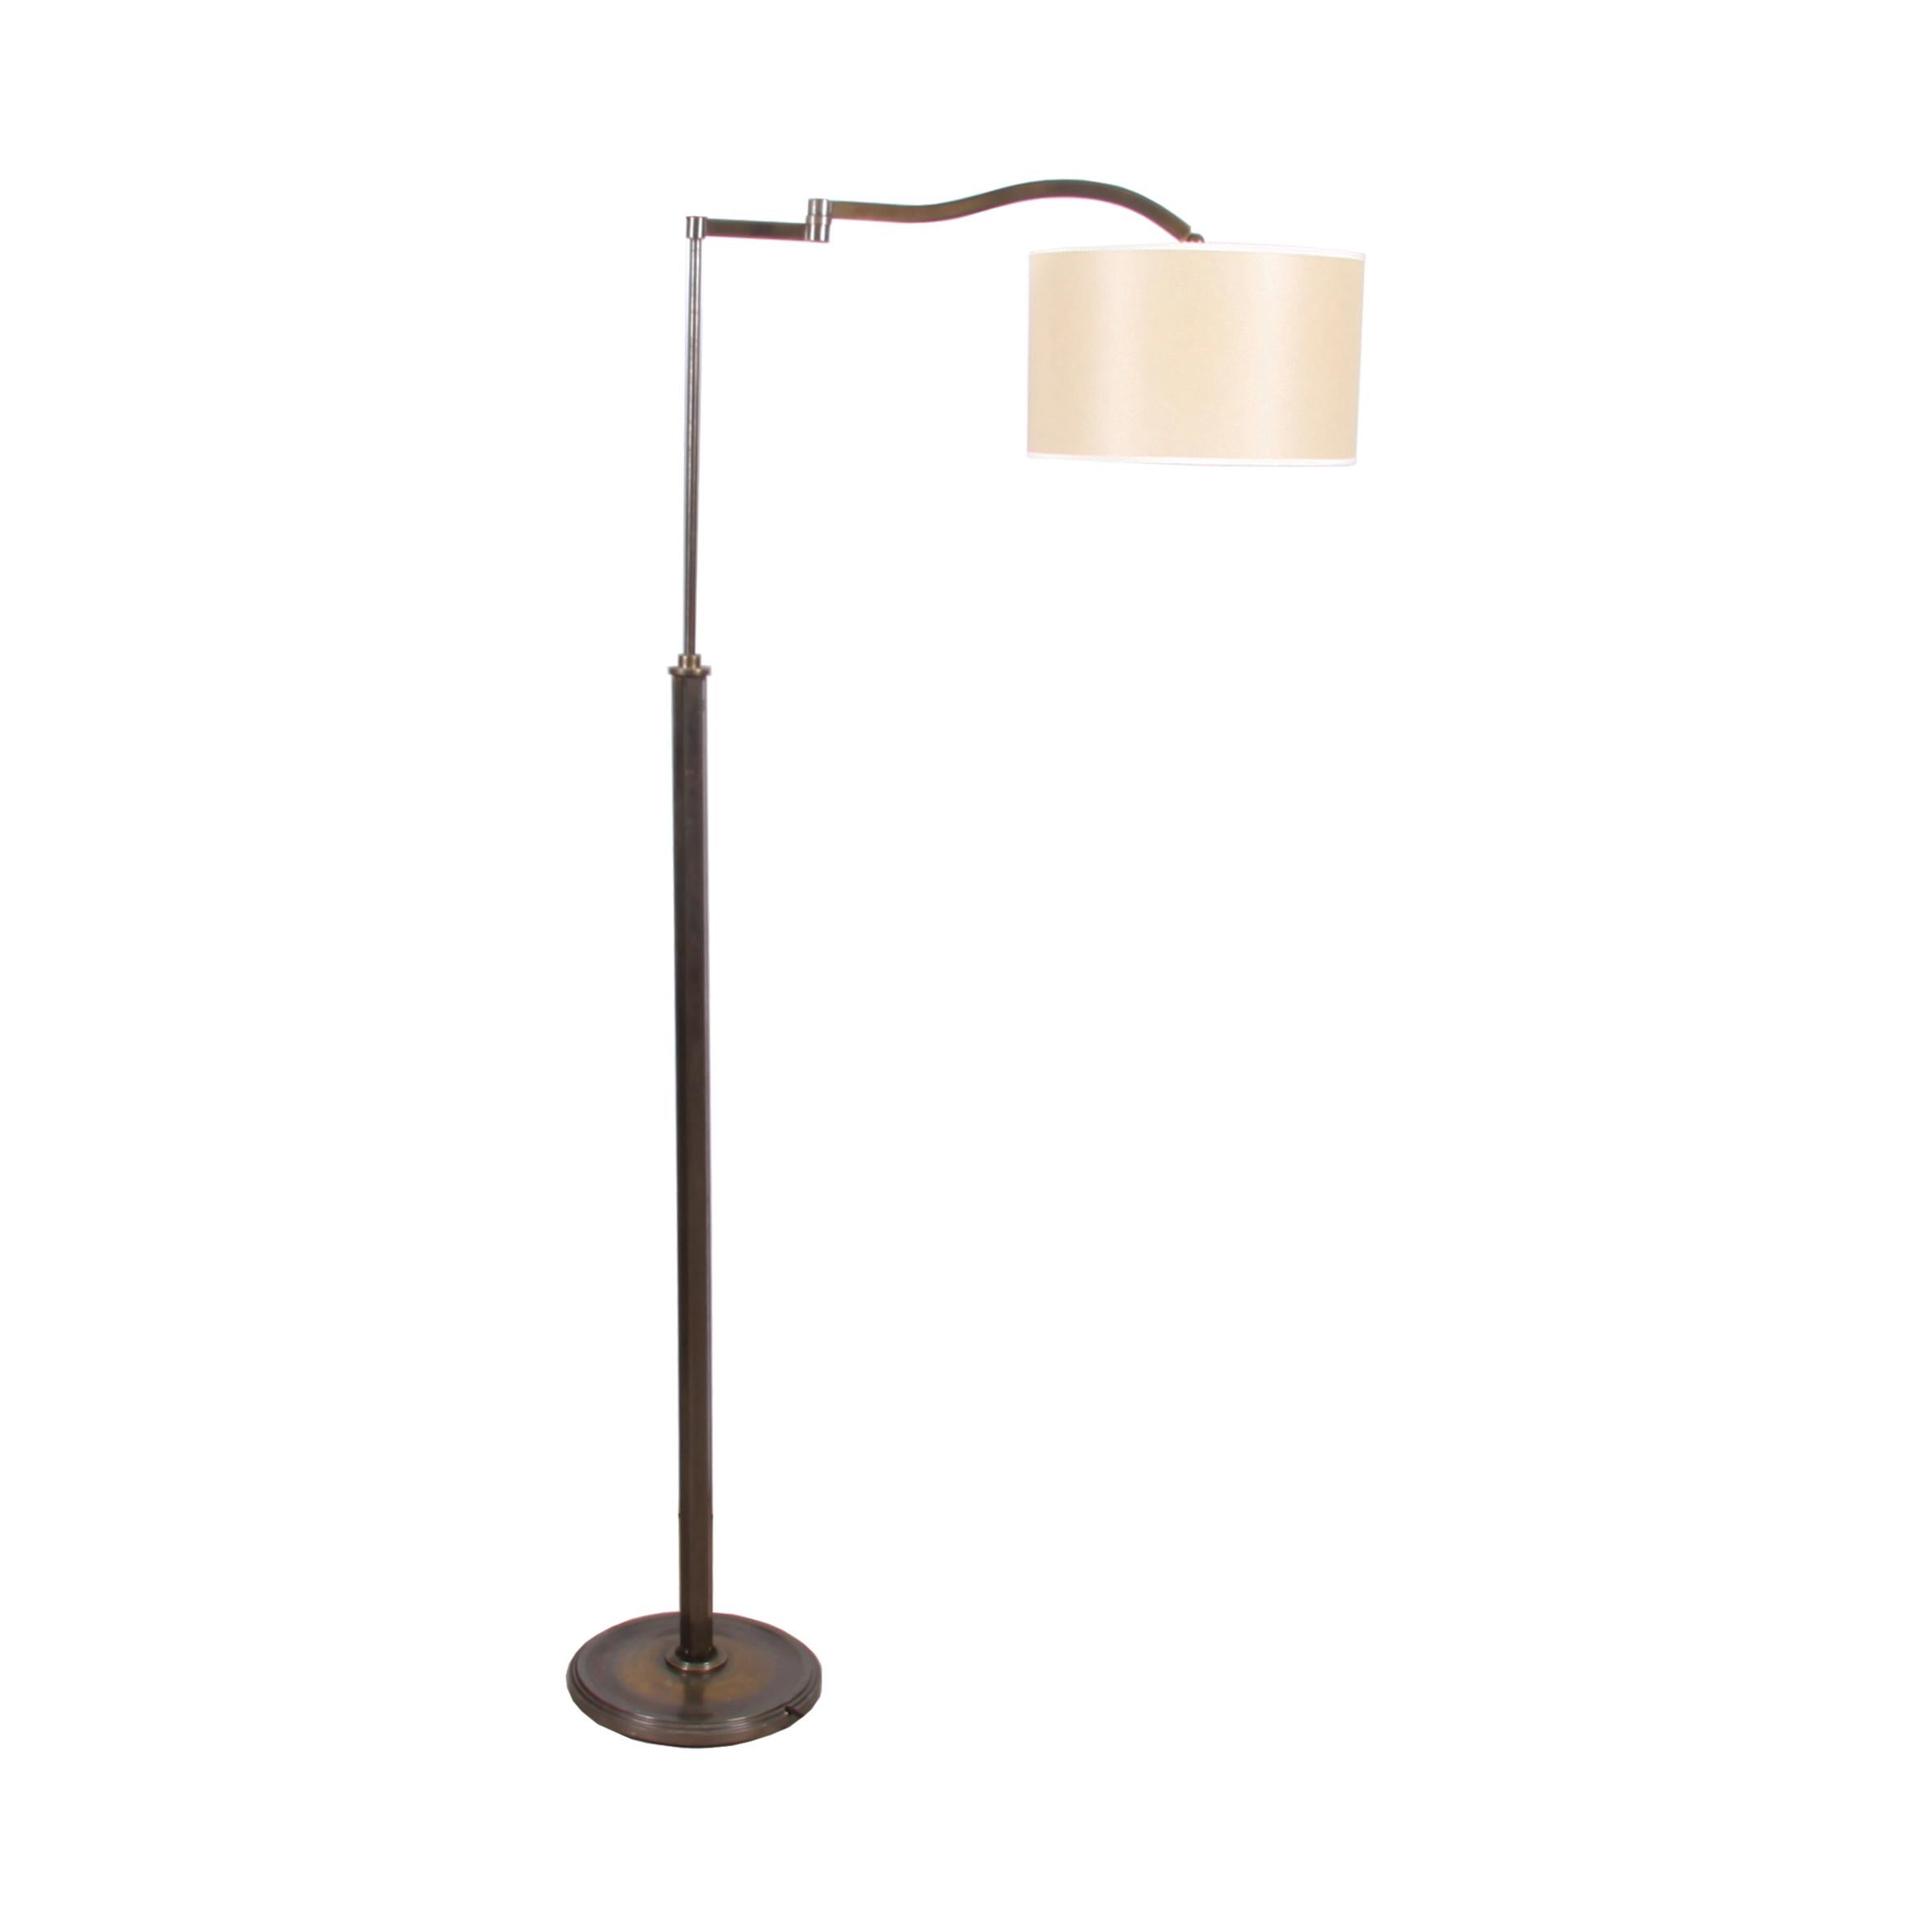 This Italian swing arm floor lamp is fully adjustable, as demonstrated by the pictures. An interesting design with a hexagonal column and a circular base. Made from patinated brass in the 1950s. A great addition to any room, these lamps are